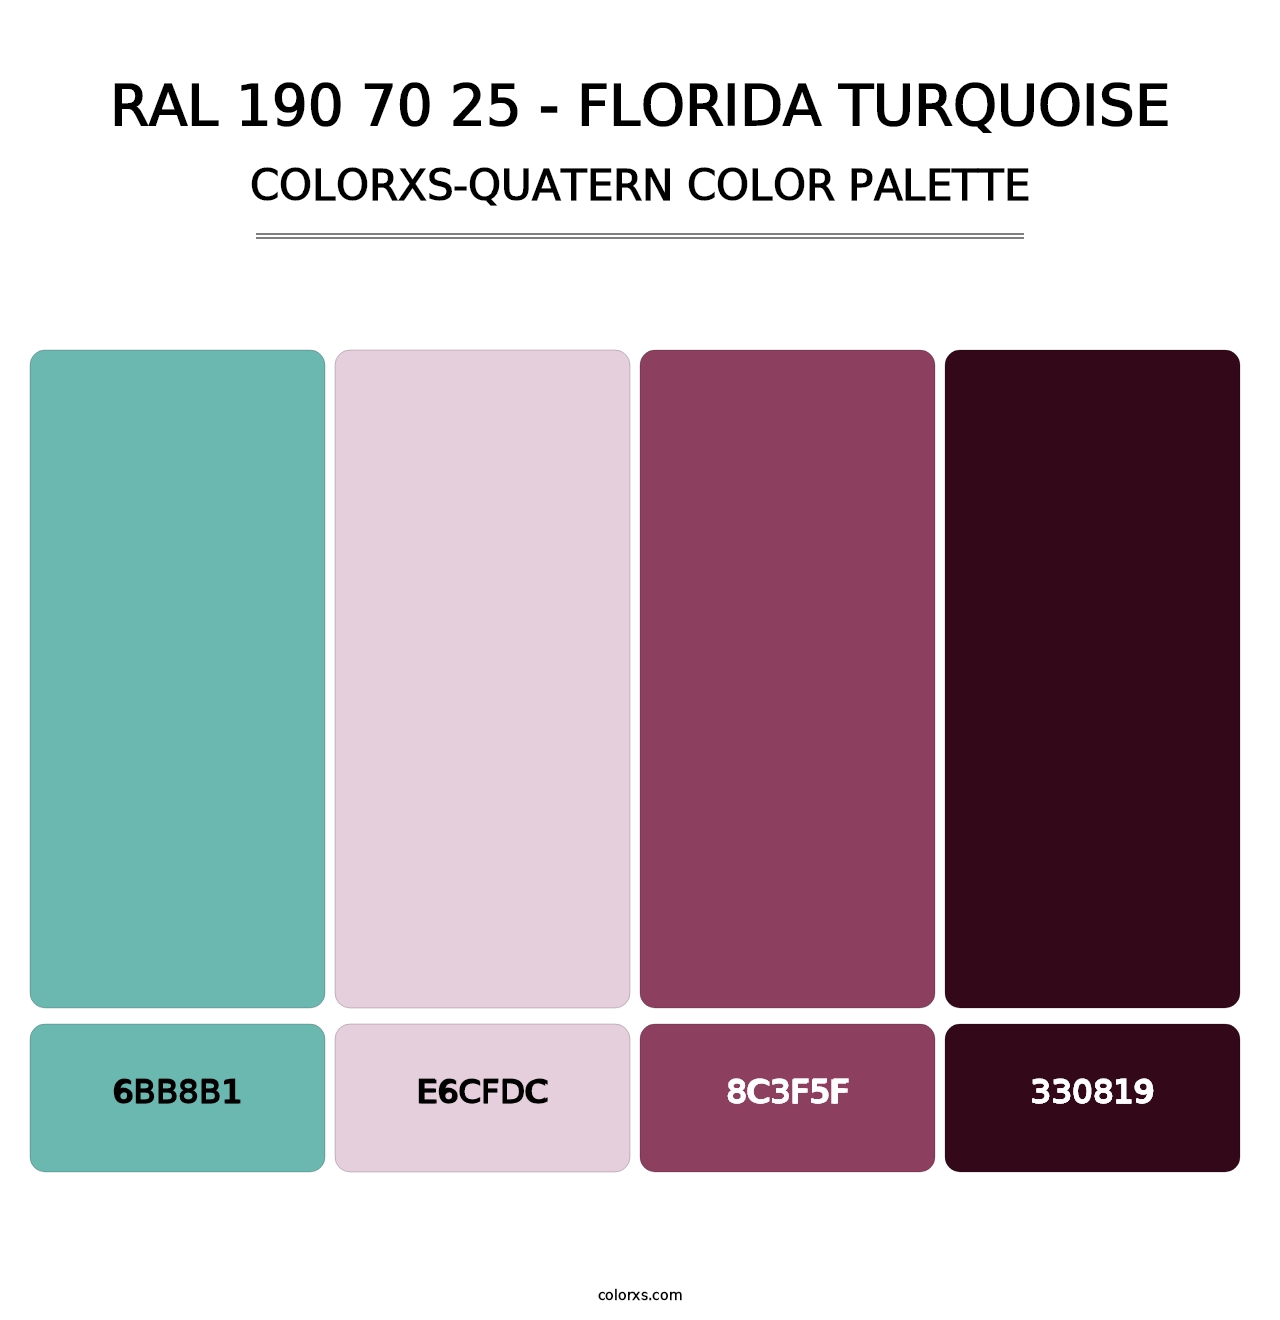 RAL 190 70 25 - Florida Turquoise - Colorxs Quatern Palette